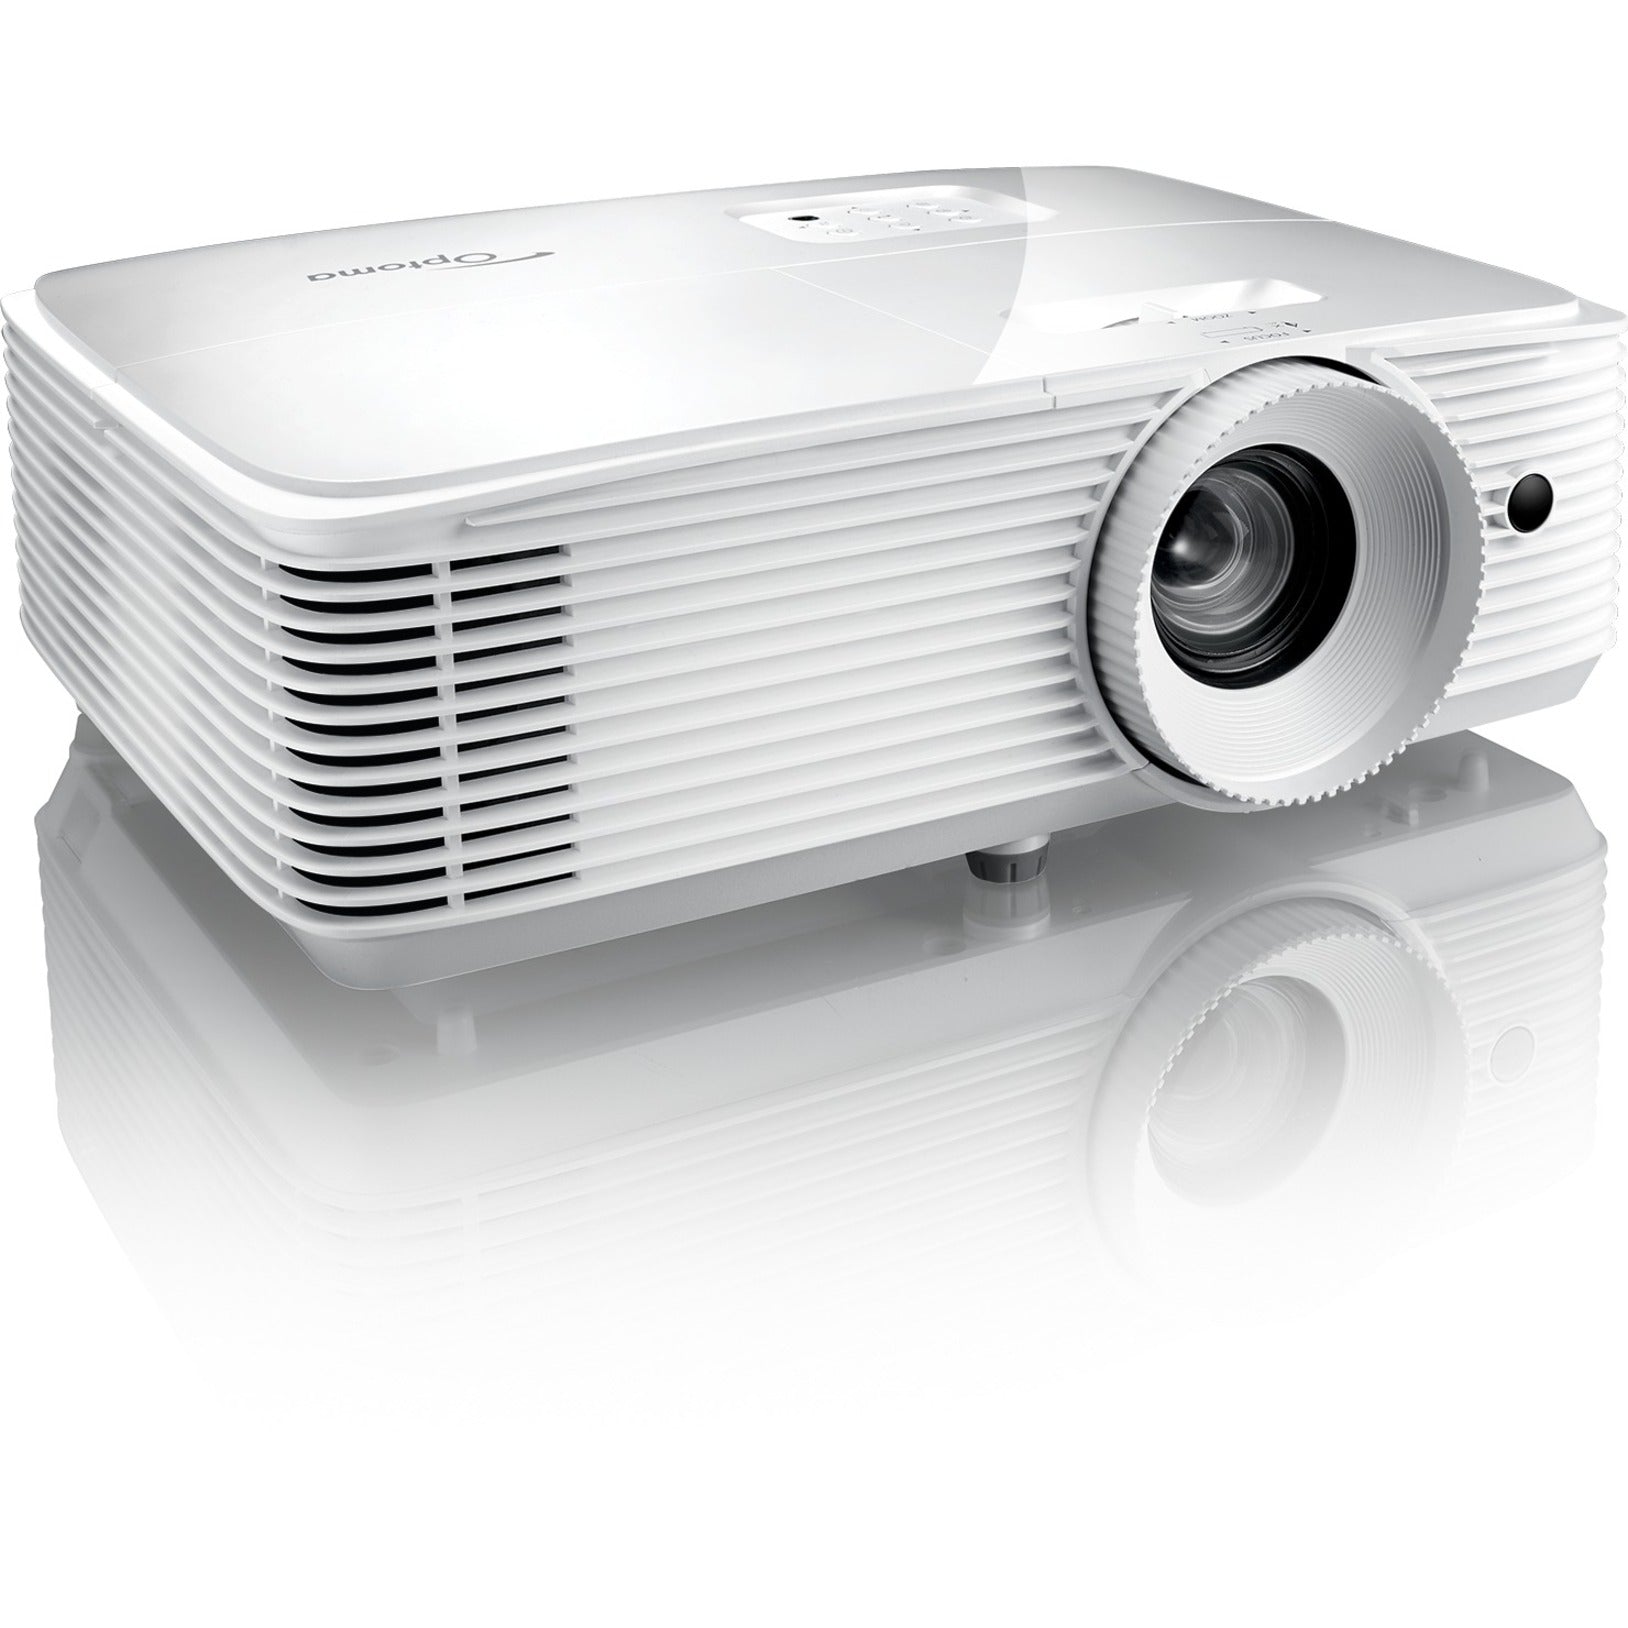 Optoma EH412 3D DLP Projector - Bright 1080p Projection, Full HD, 4500 lm, 16:9